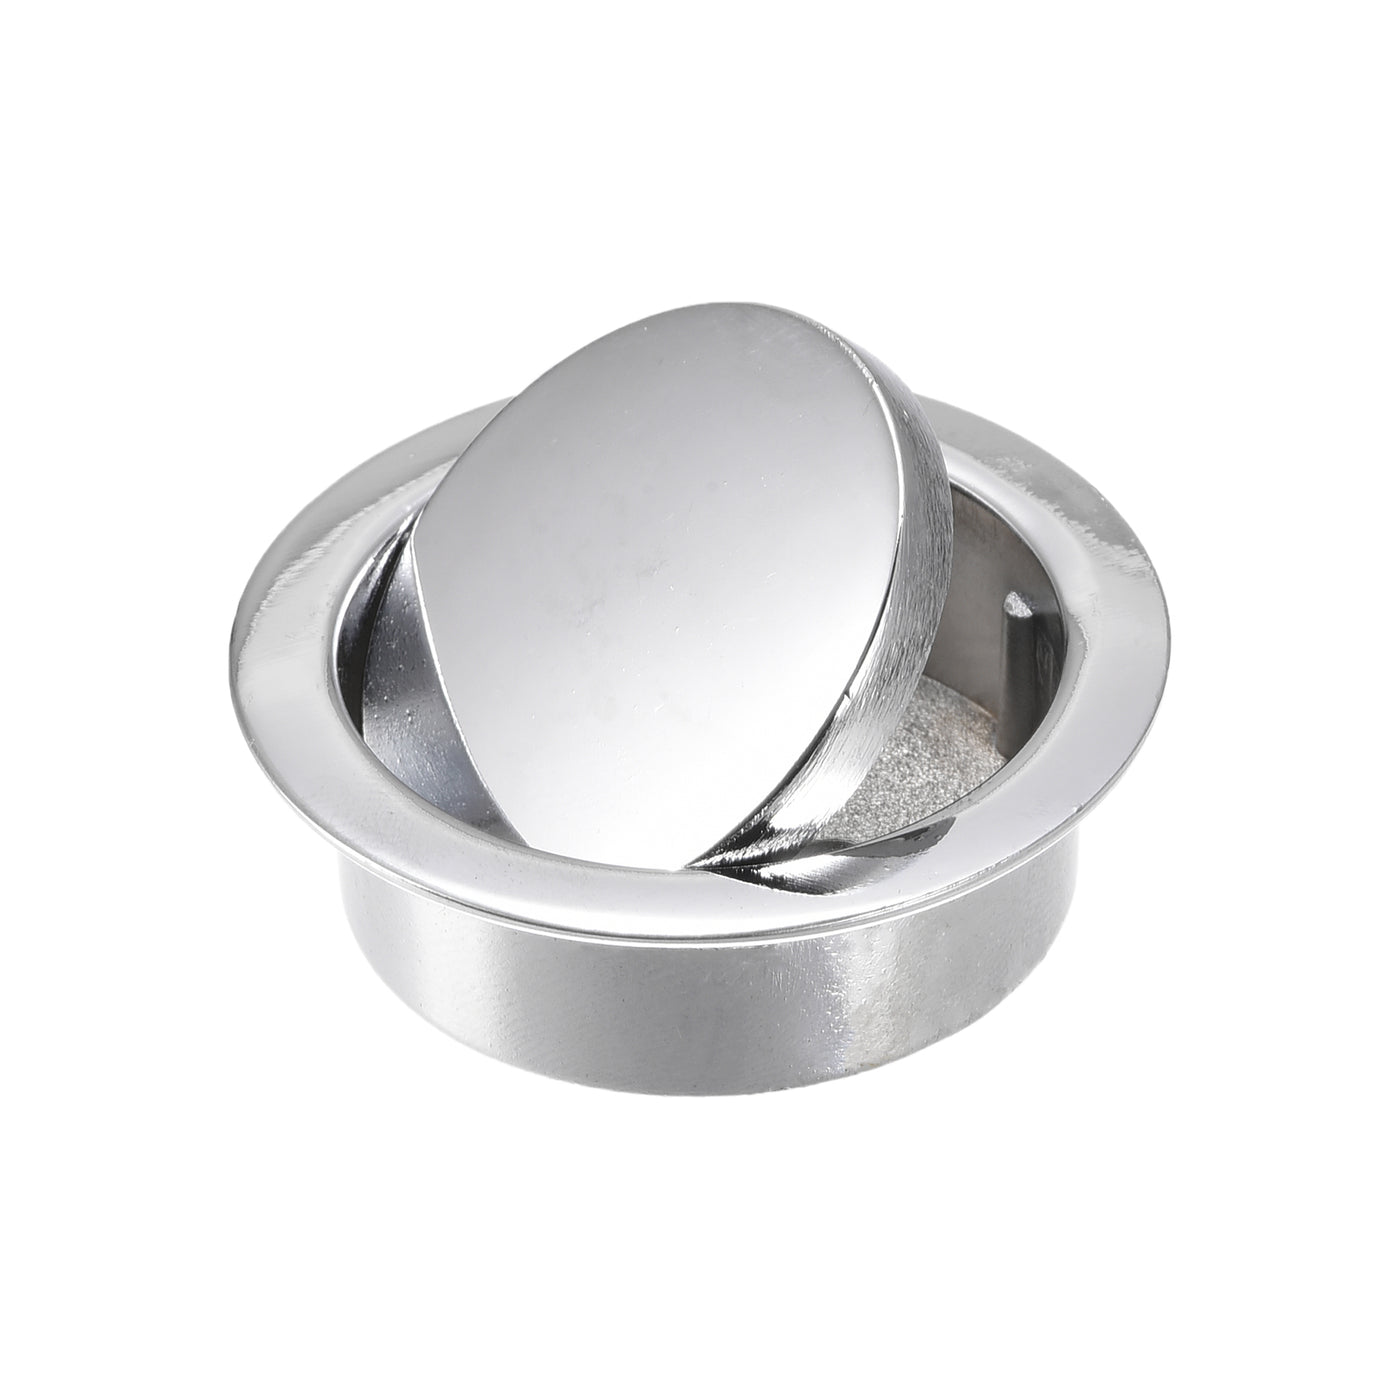 uxcell Uxcell Finger Flush Pull Handle 2pcs Installation Hole Dia. 35mm/1.38" Bright Silver with Plates